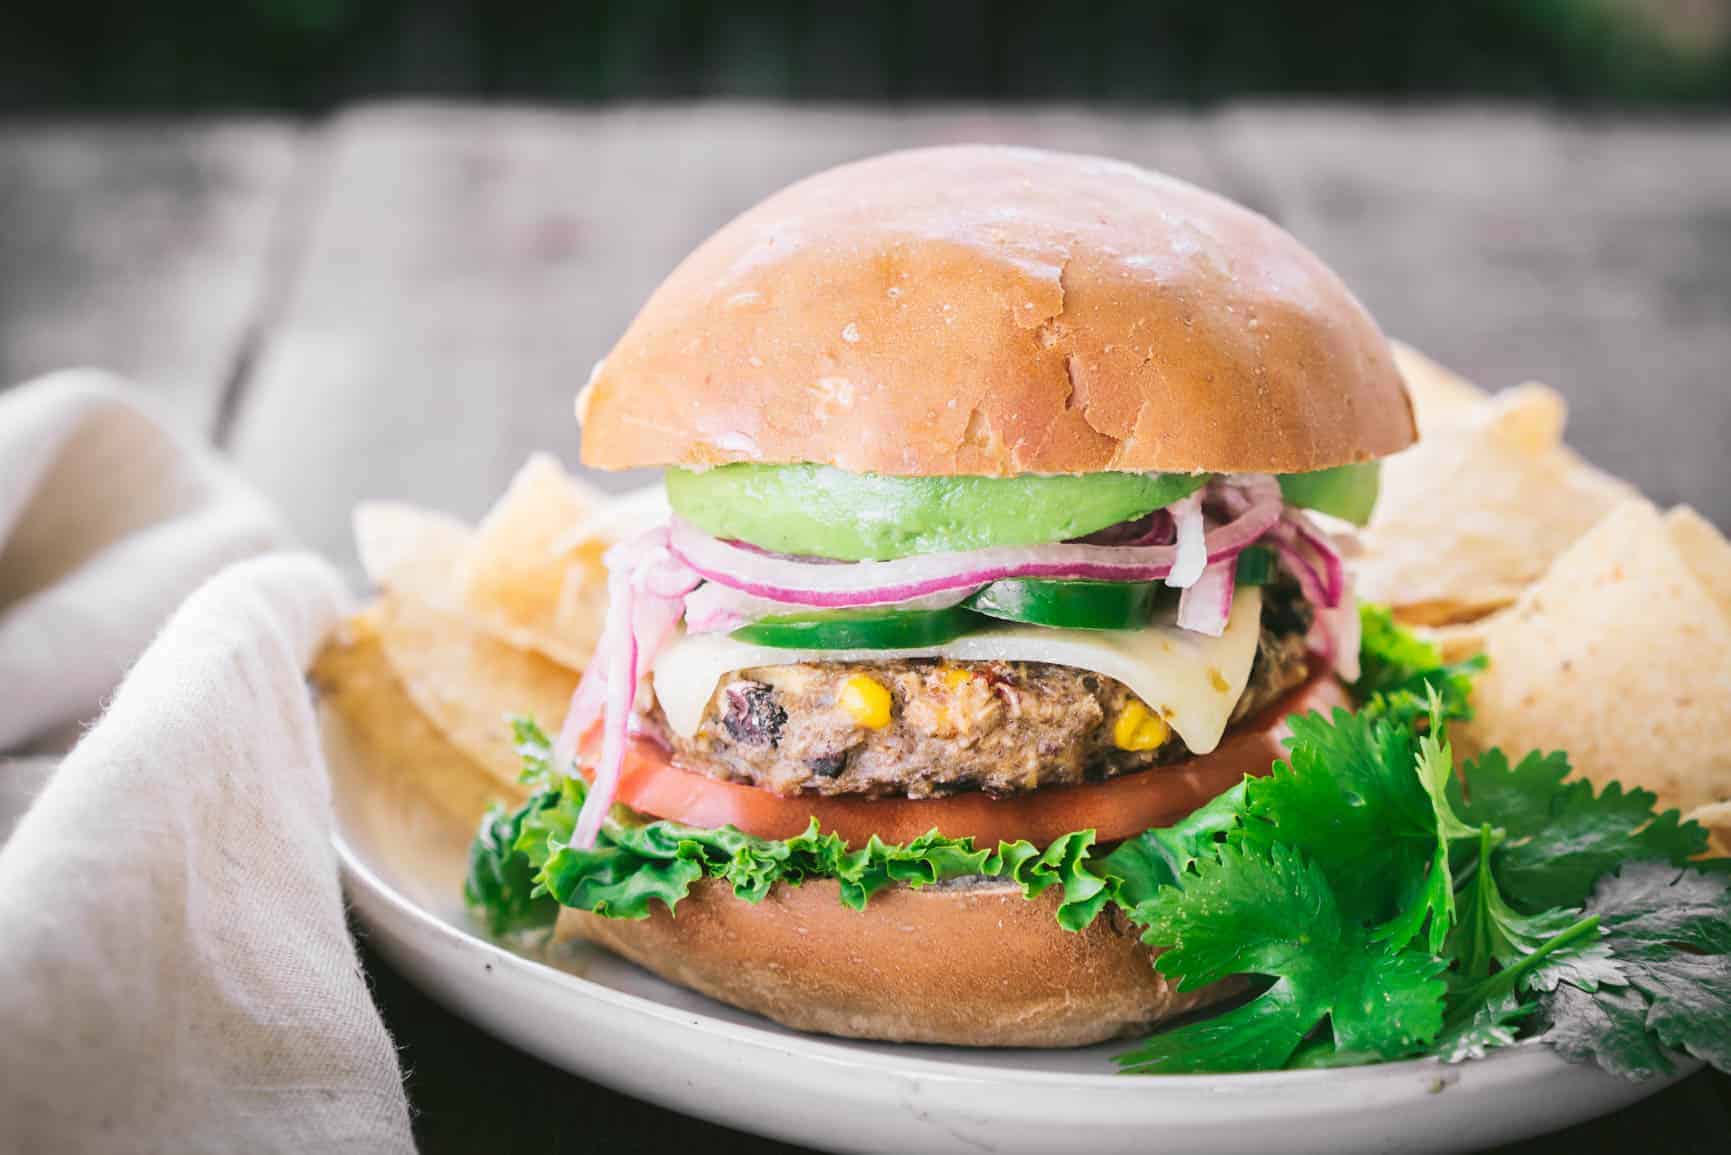 How to Make the Ultimate Vegetarian Burger